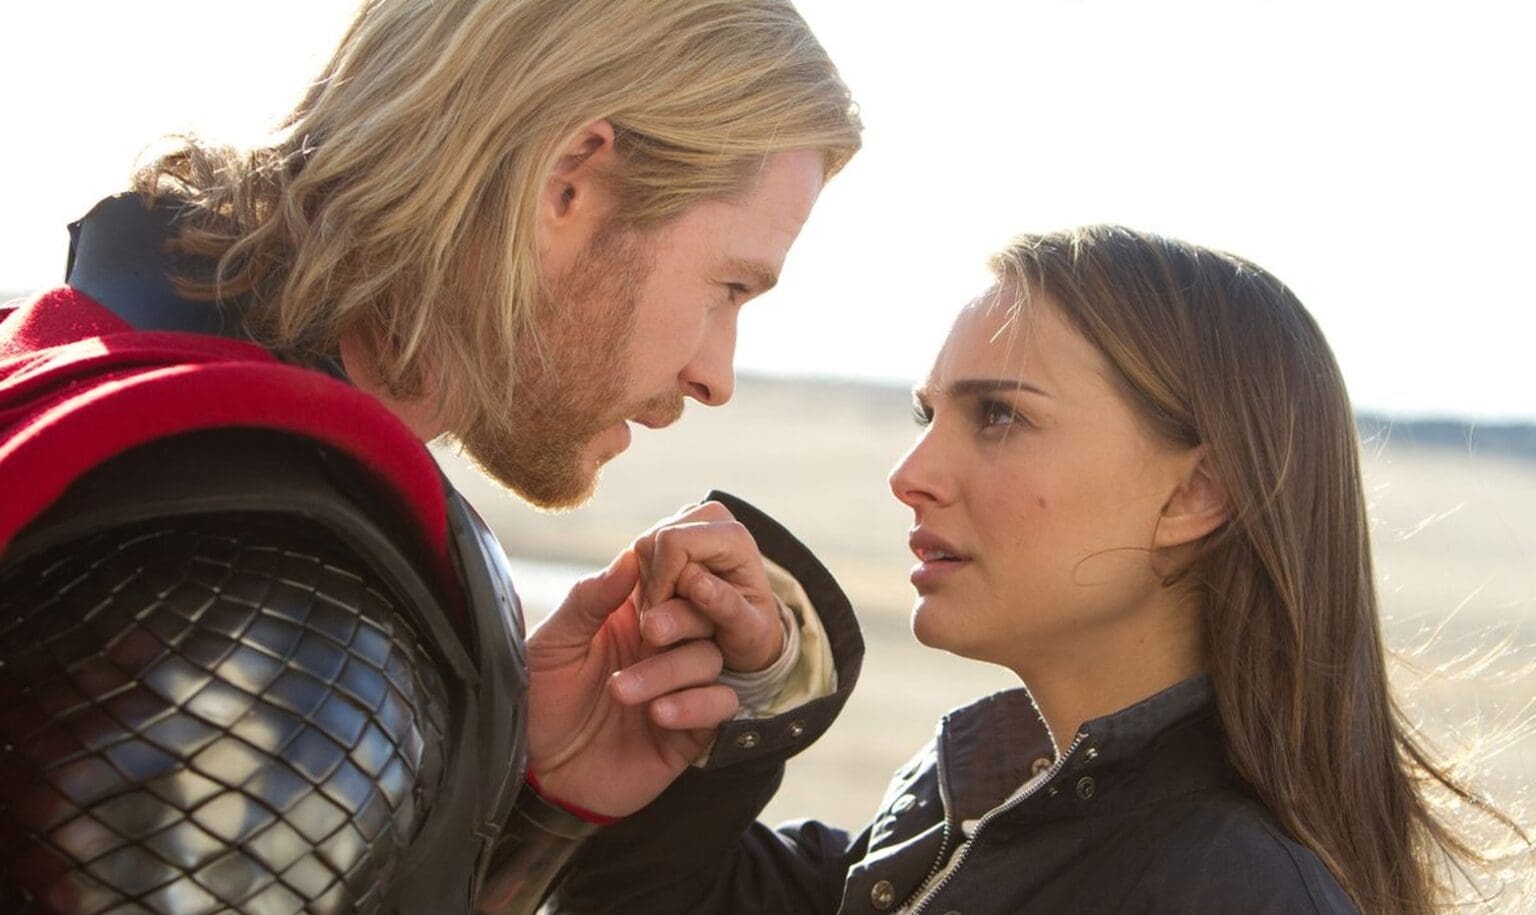 Natalie Portman and Apple are working together like Thor and Jane Foster.